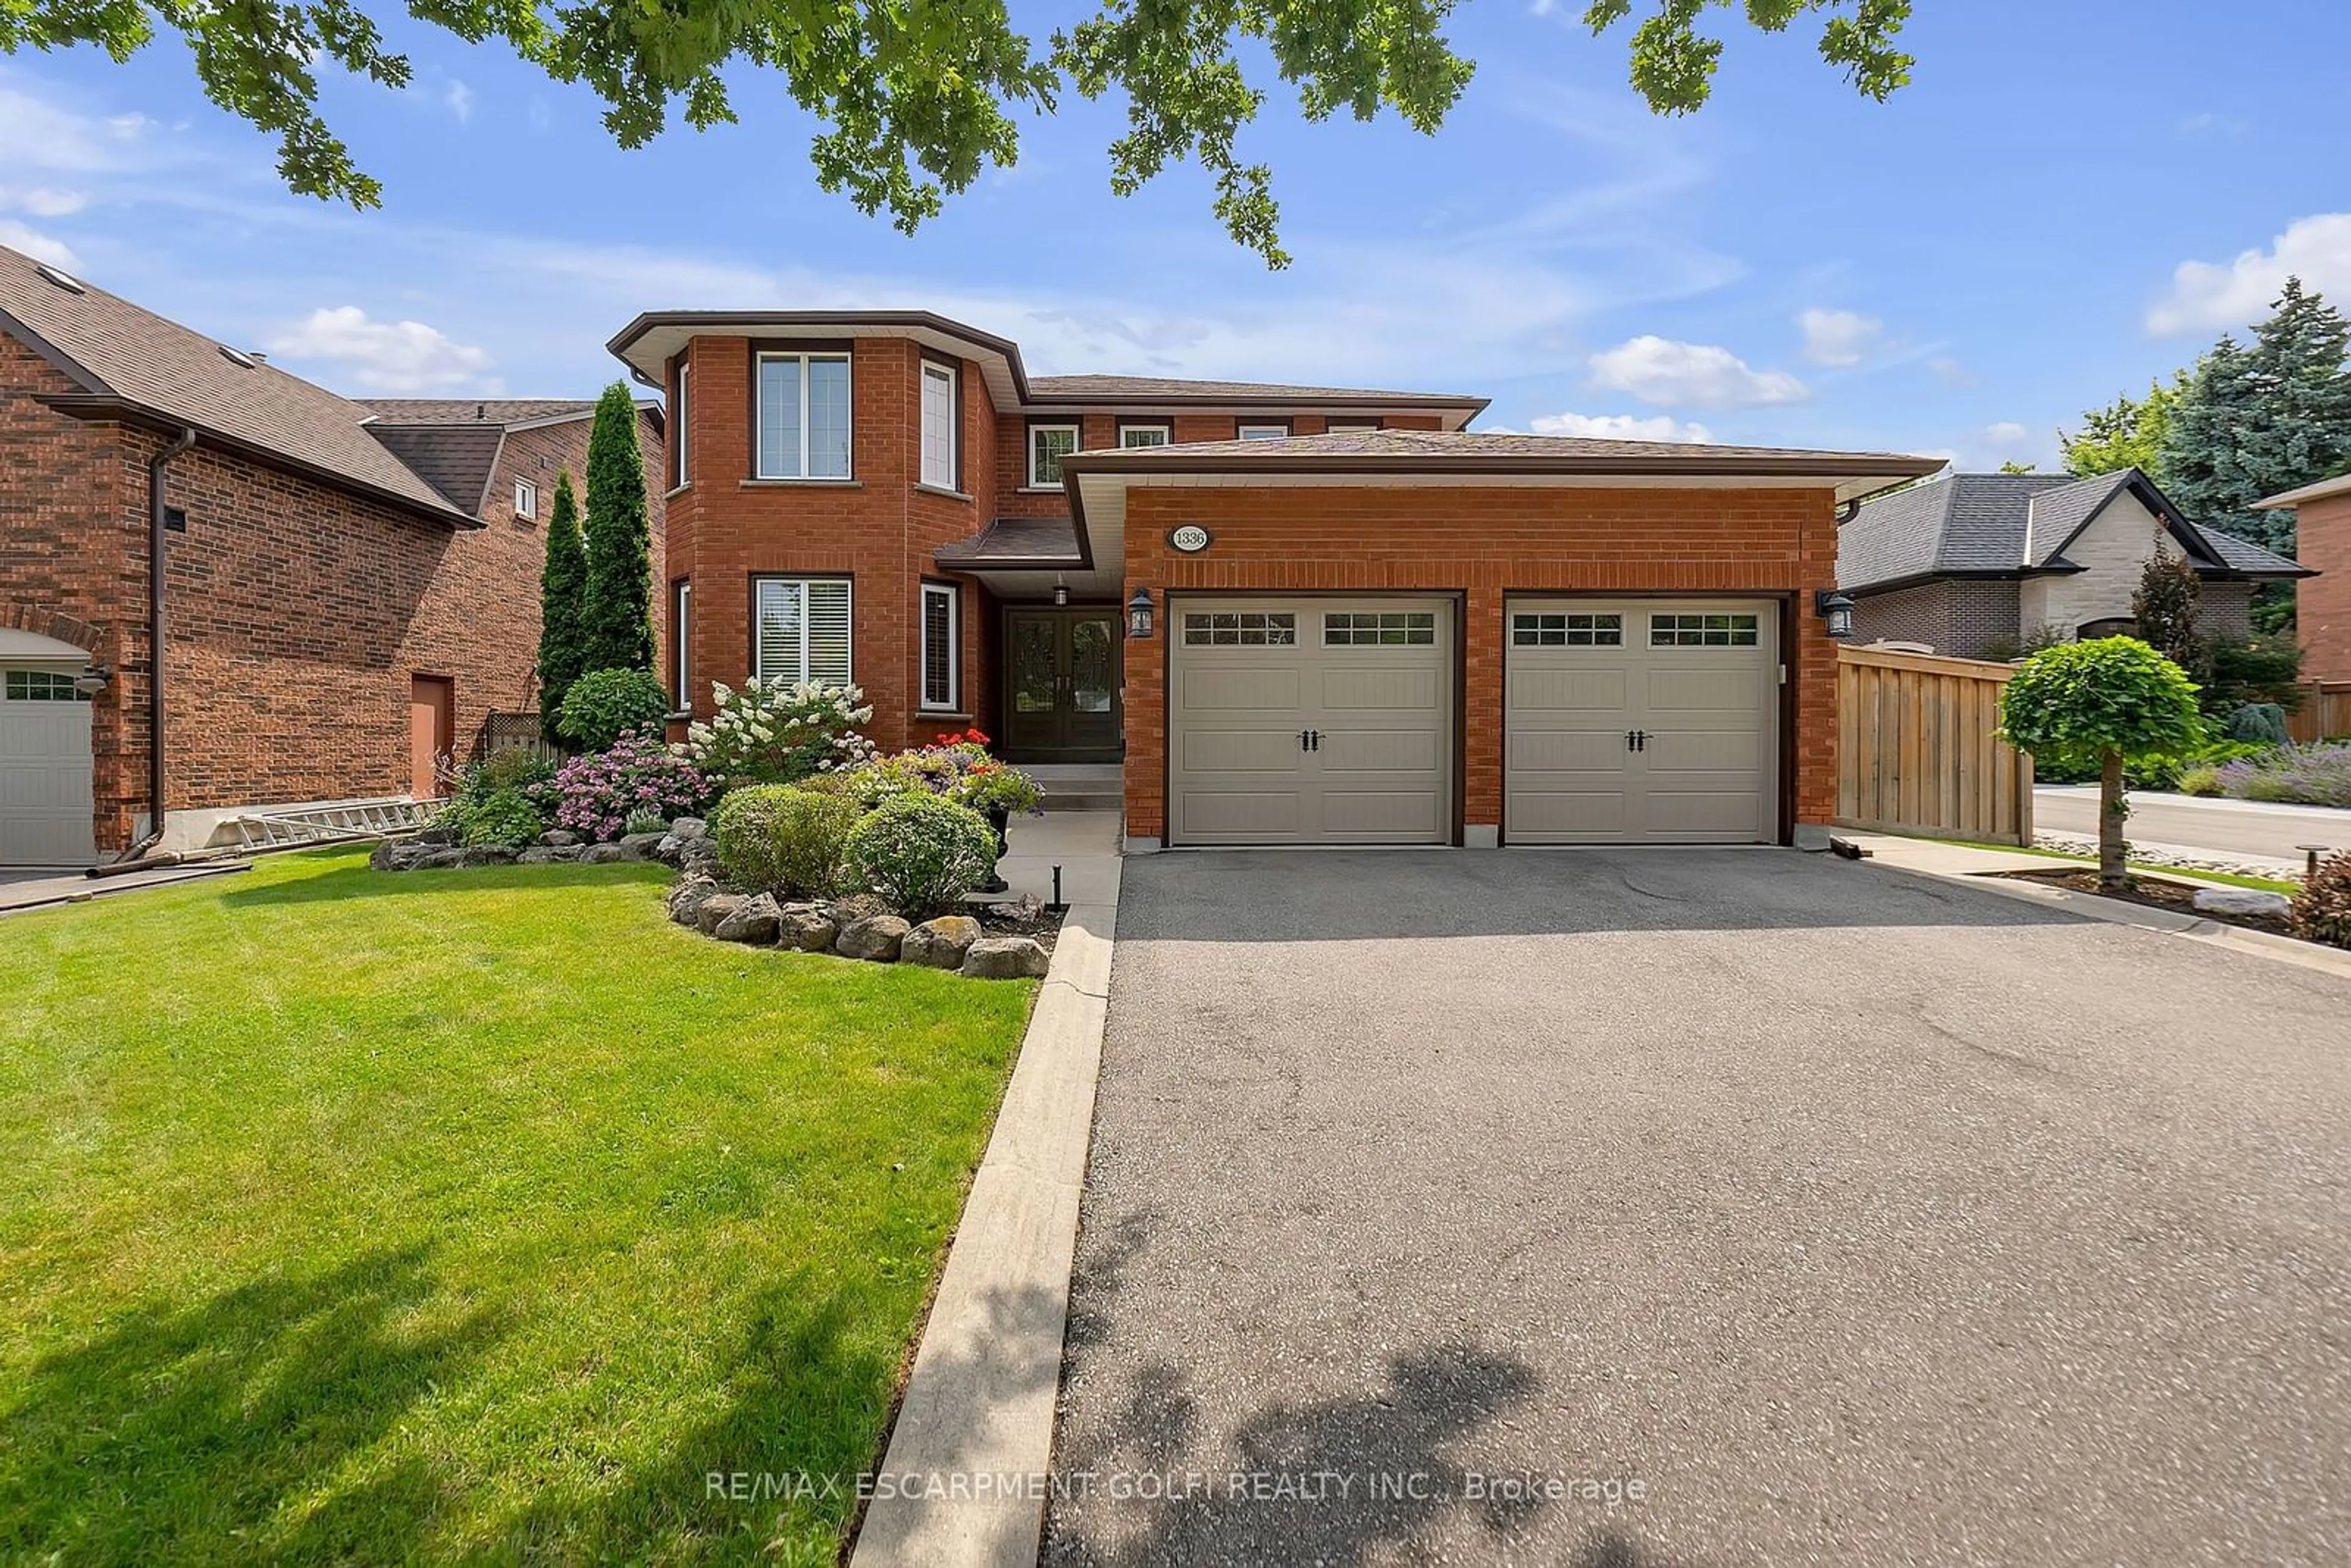 Home with brick exterior material for 1336 Clearview Dr, Oakville Ontario L6J 6X7